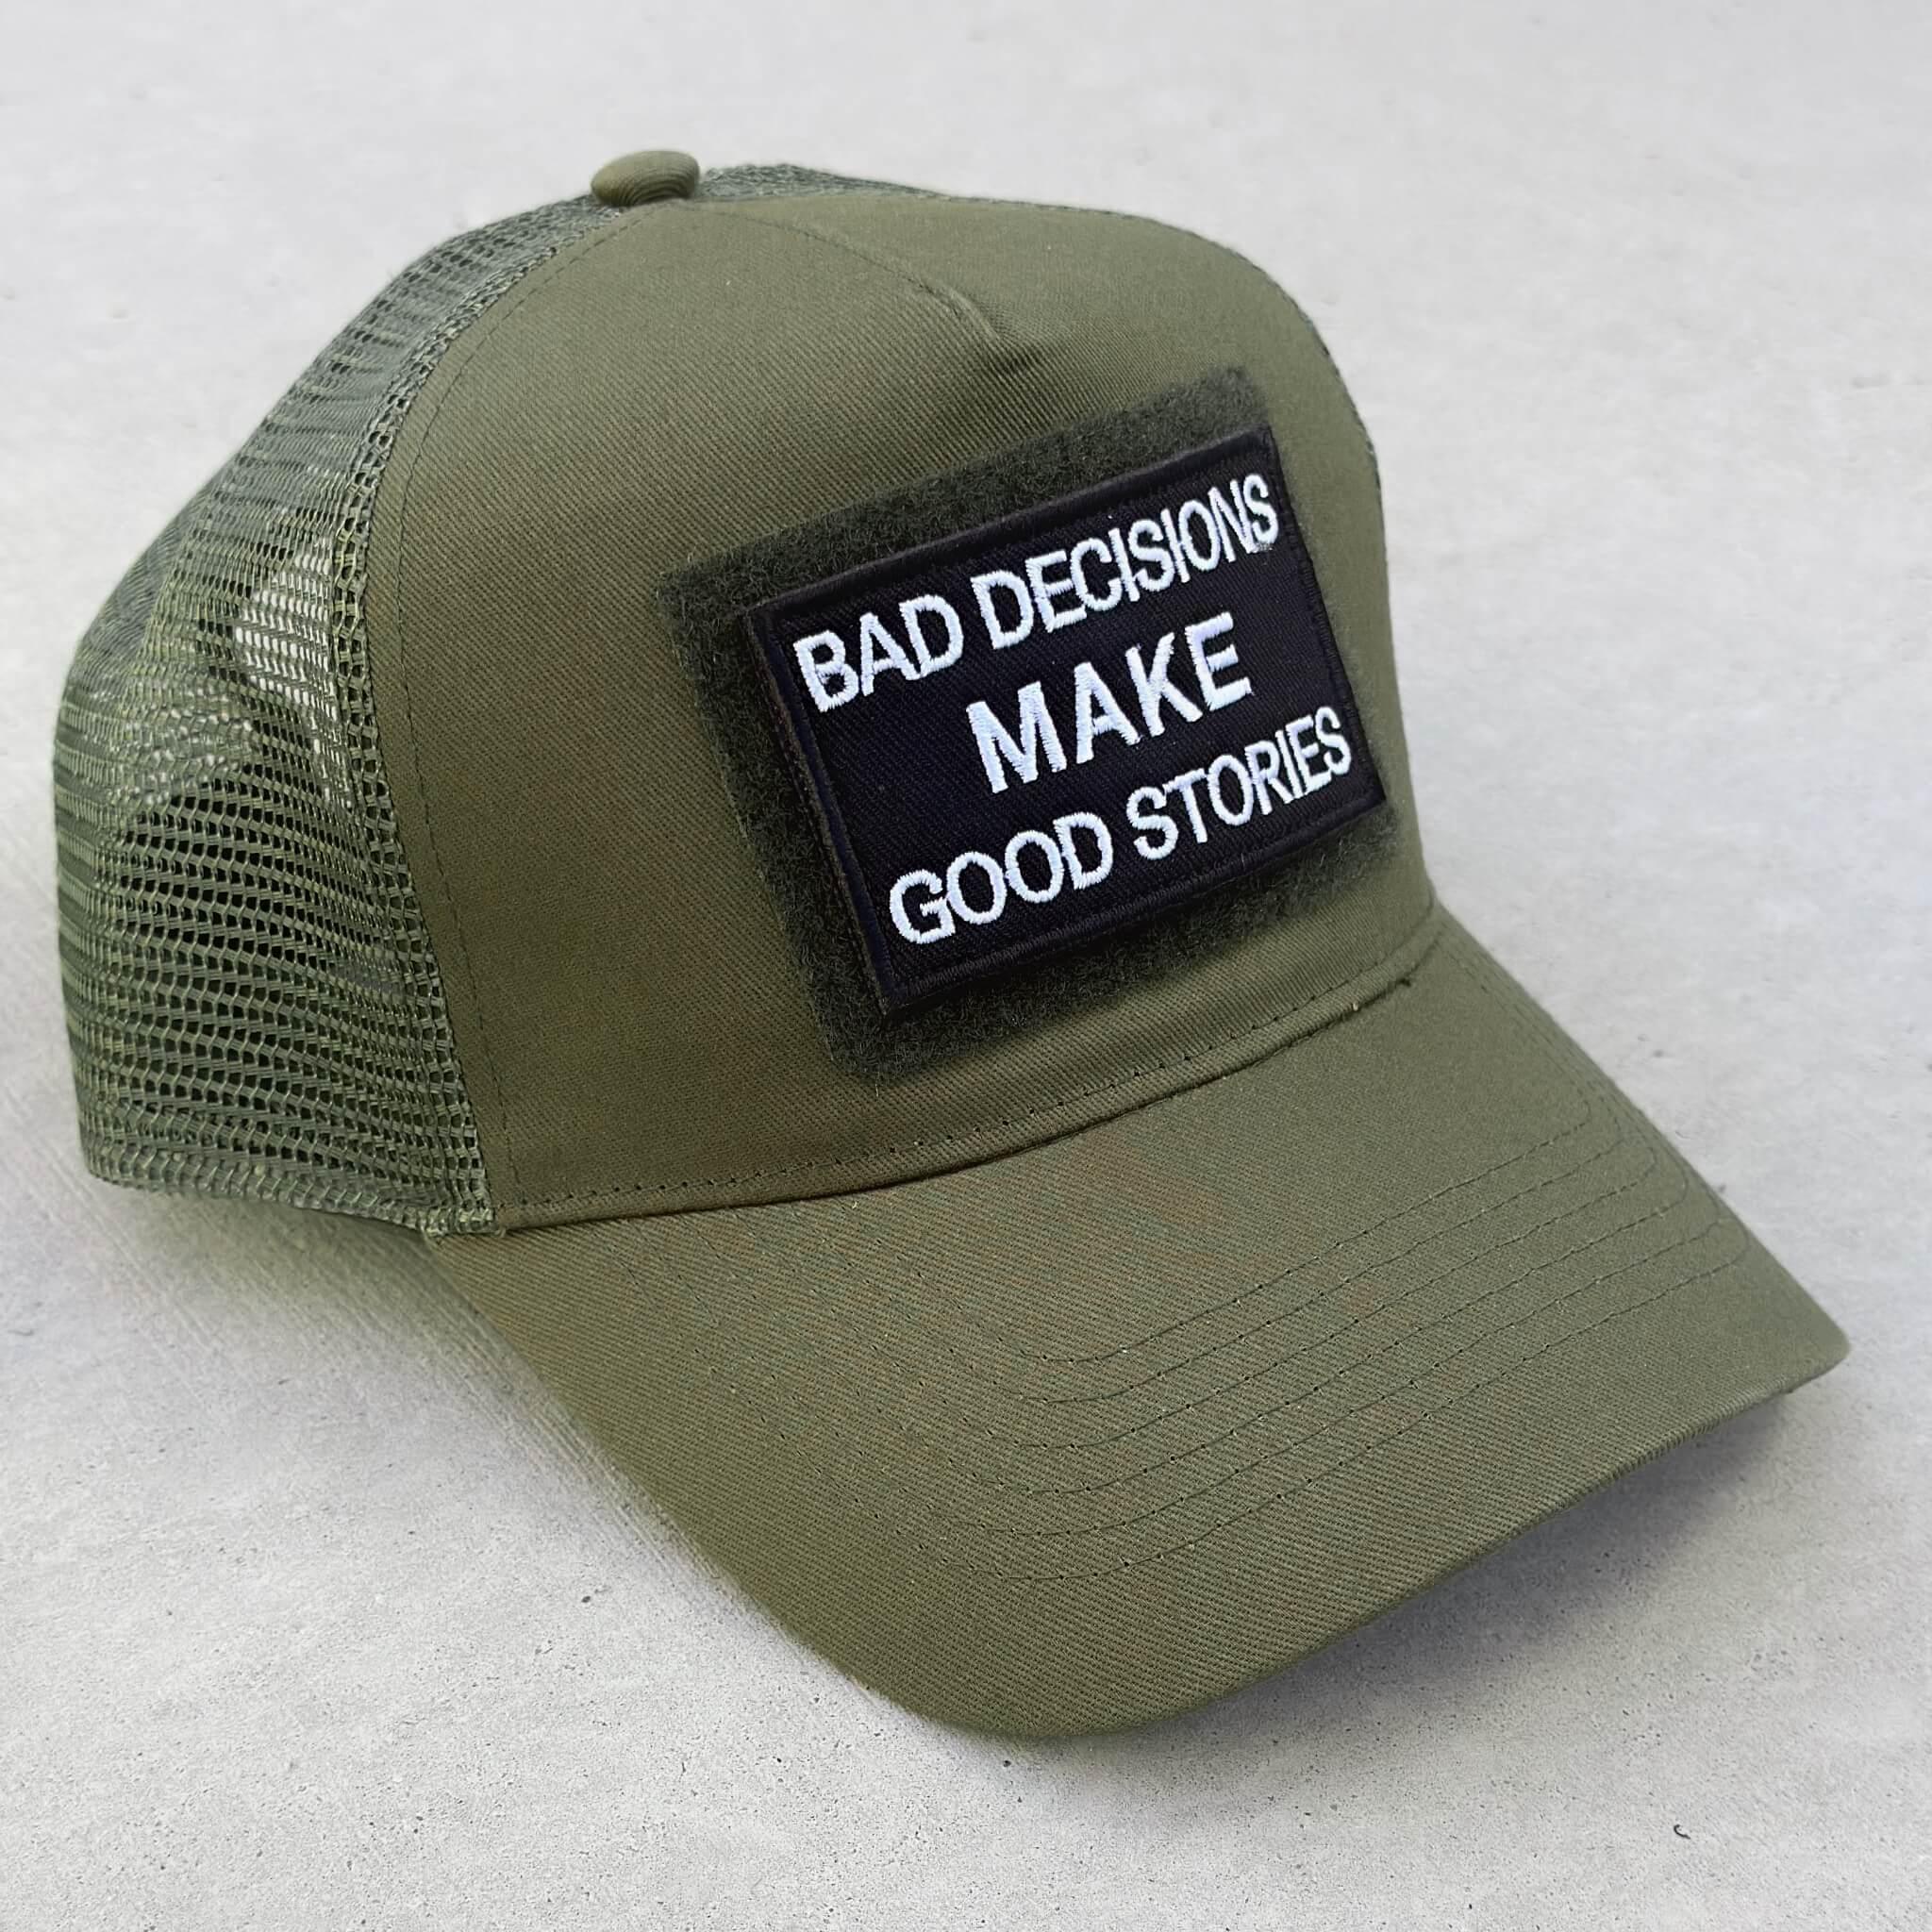 Trucker snapback cap in military green with Bad Decision Makes Good Stories patch